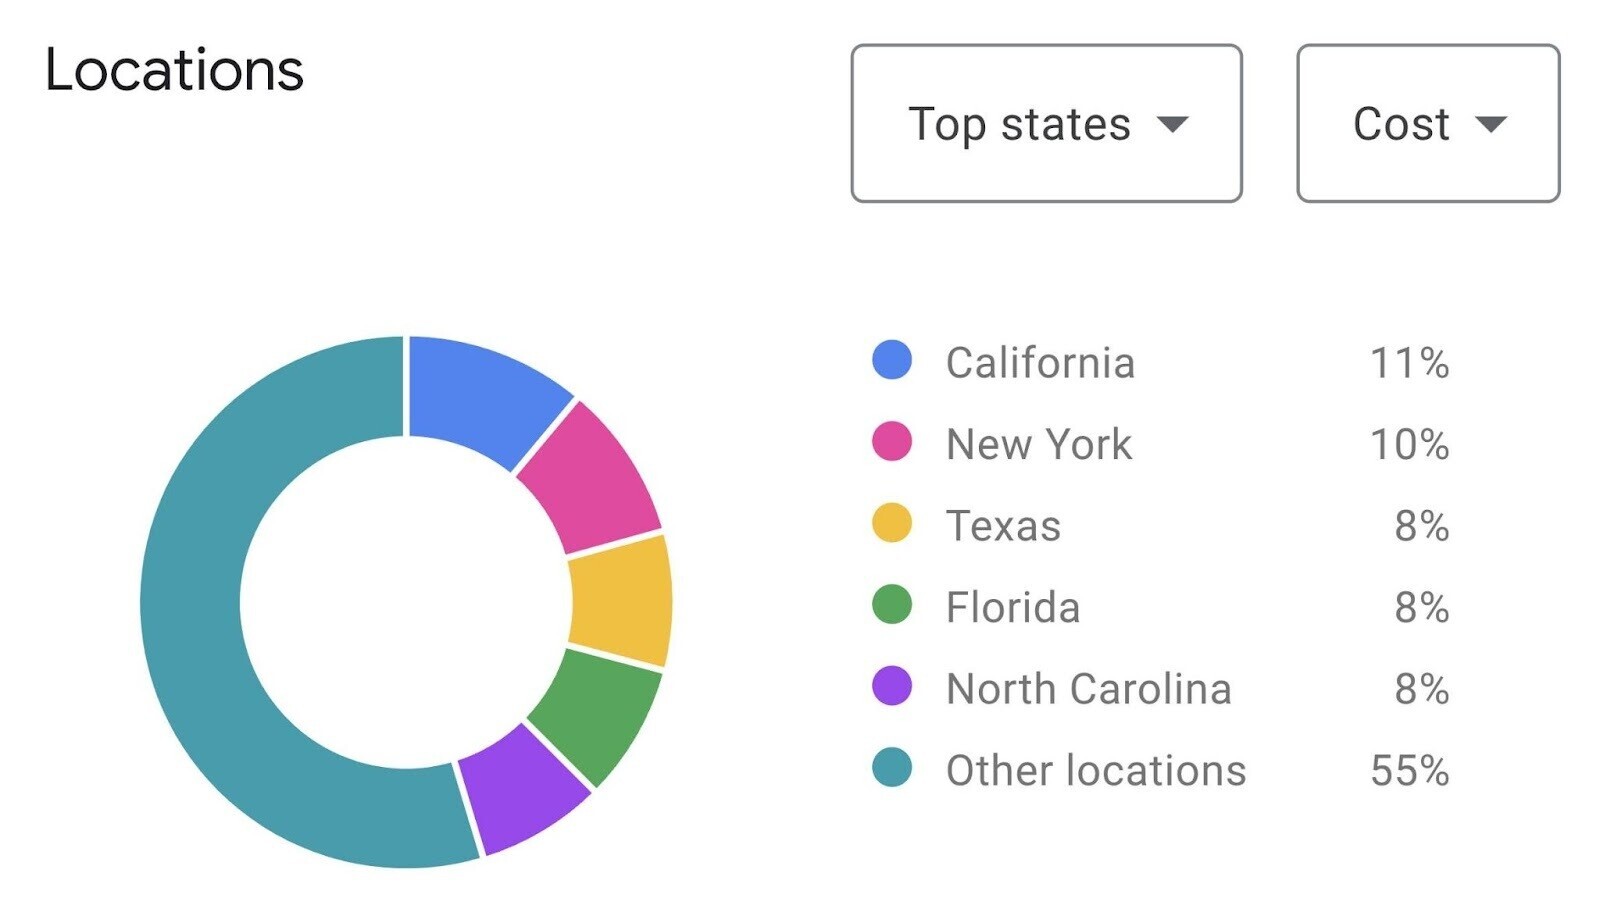 Detailed breakdown of the top states with United States location